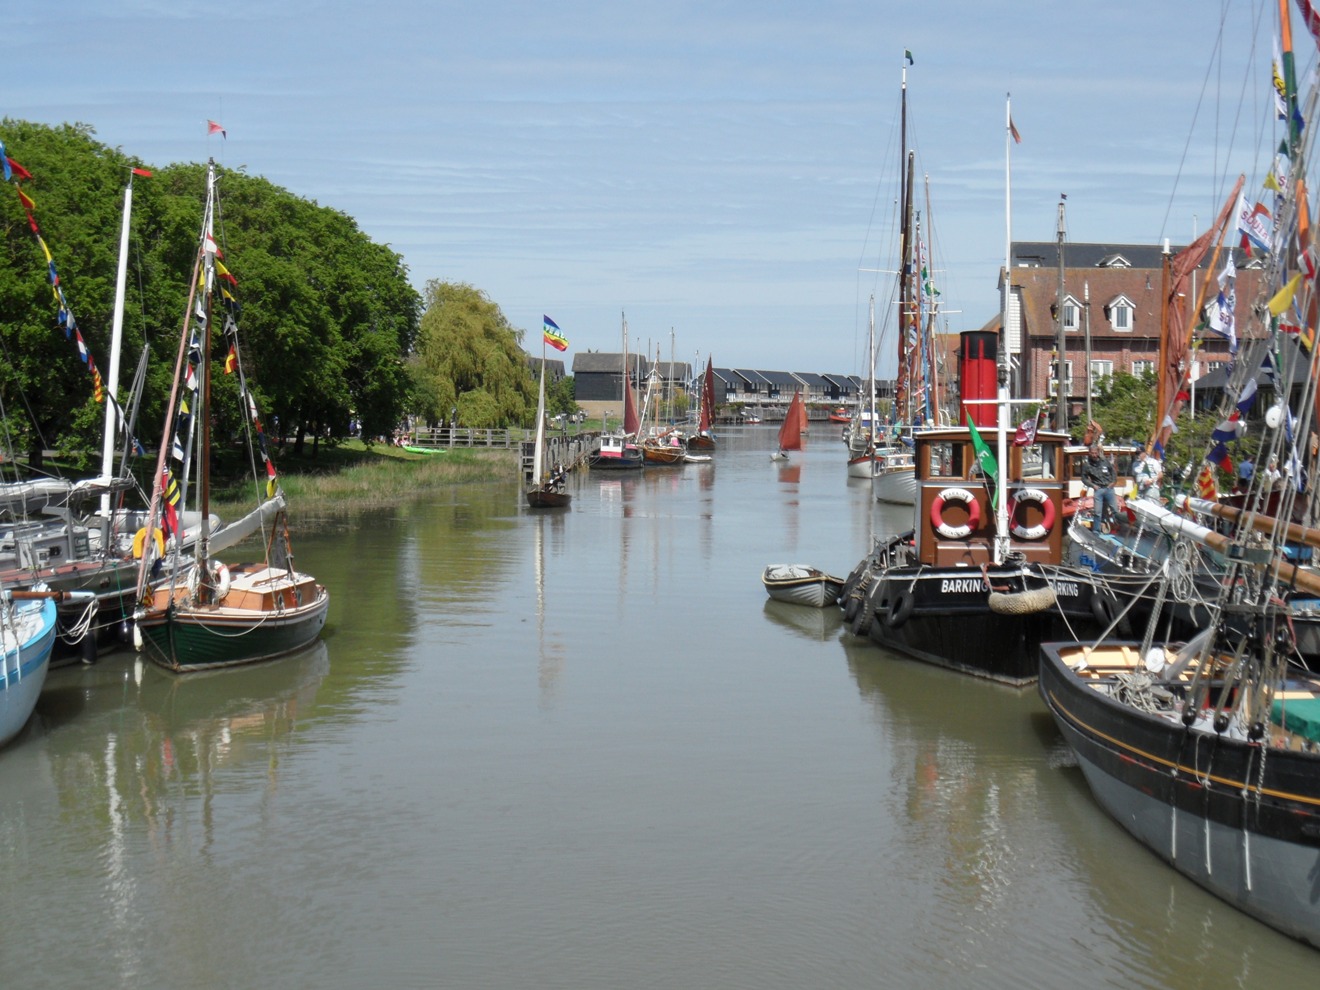  Festival 2013 – a sunny affair with more boats and a good crowd